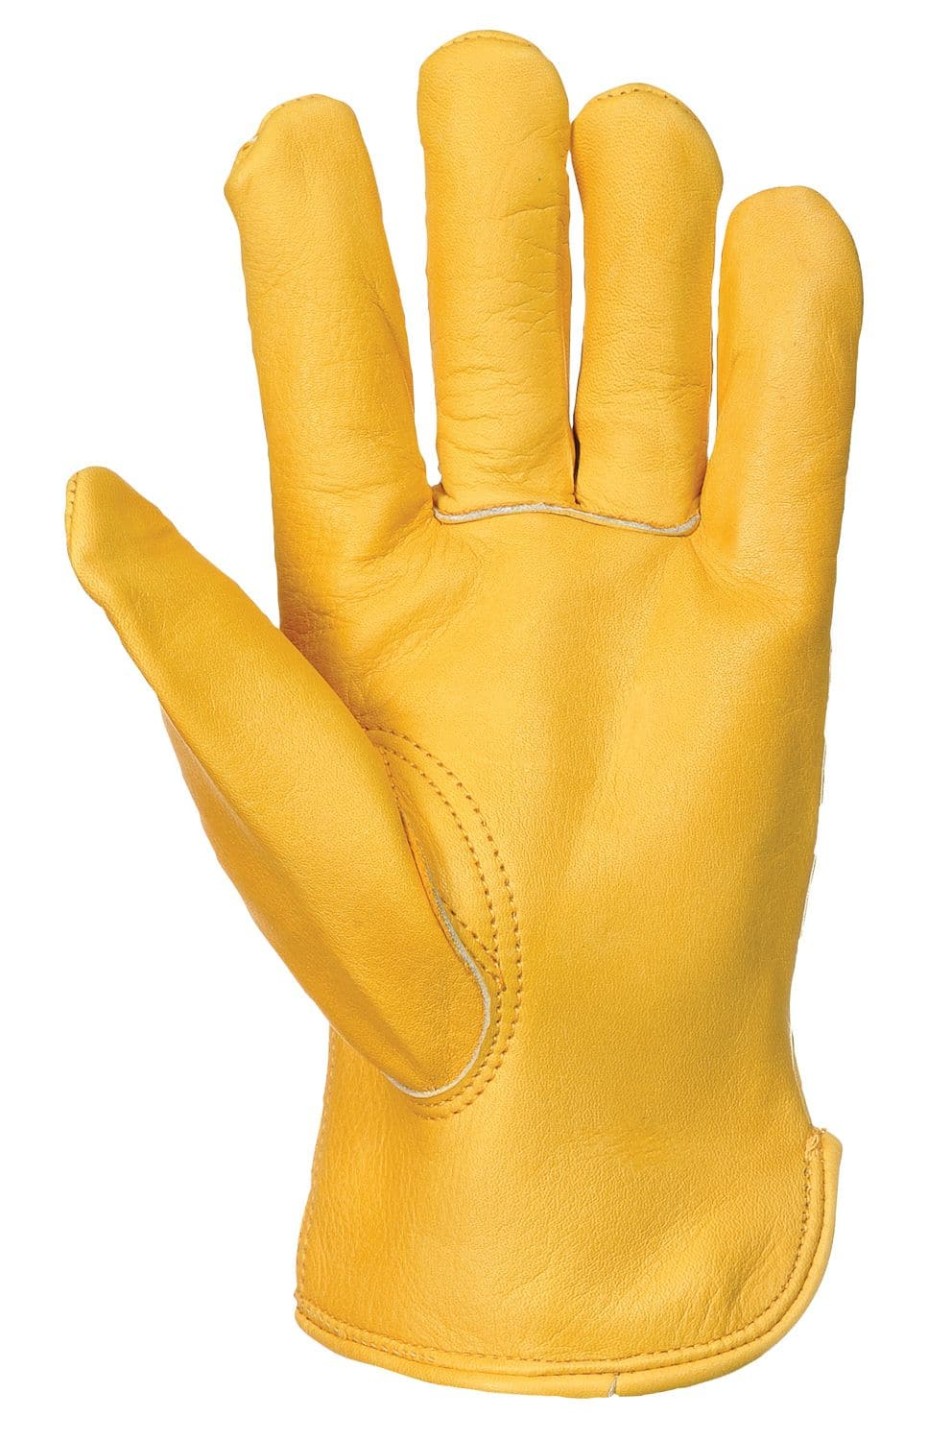 Portwest Lined Driver Glove